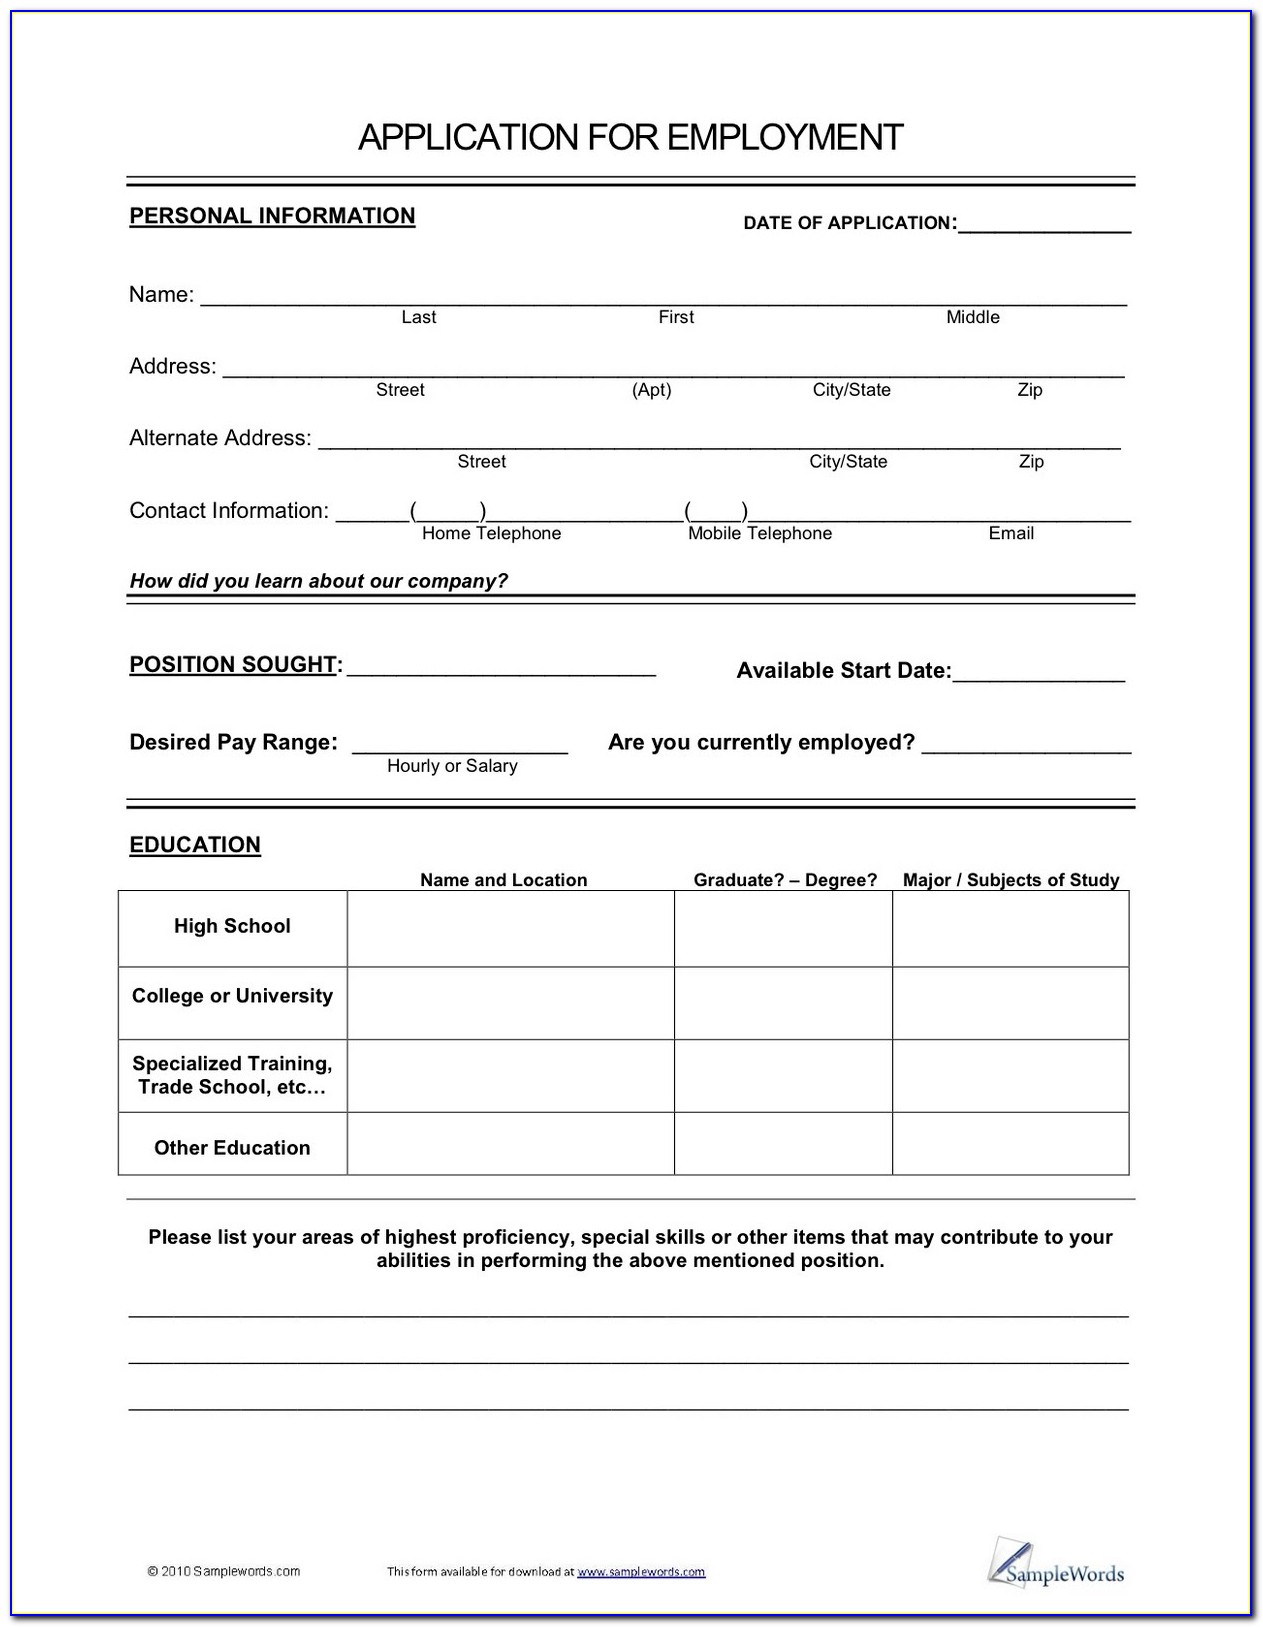 How To Fill Online Employment Registration Form